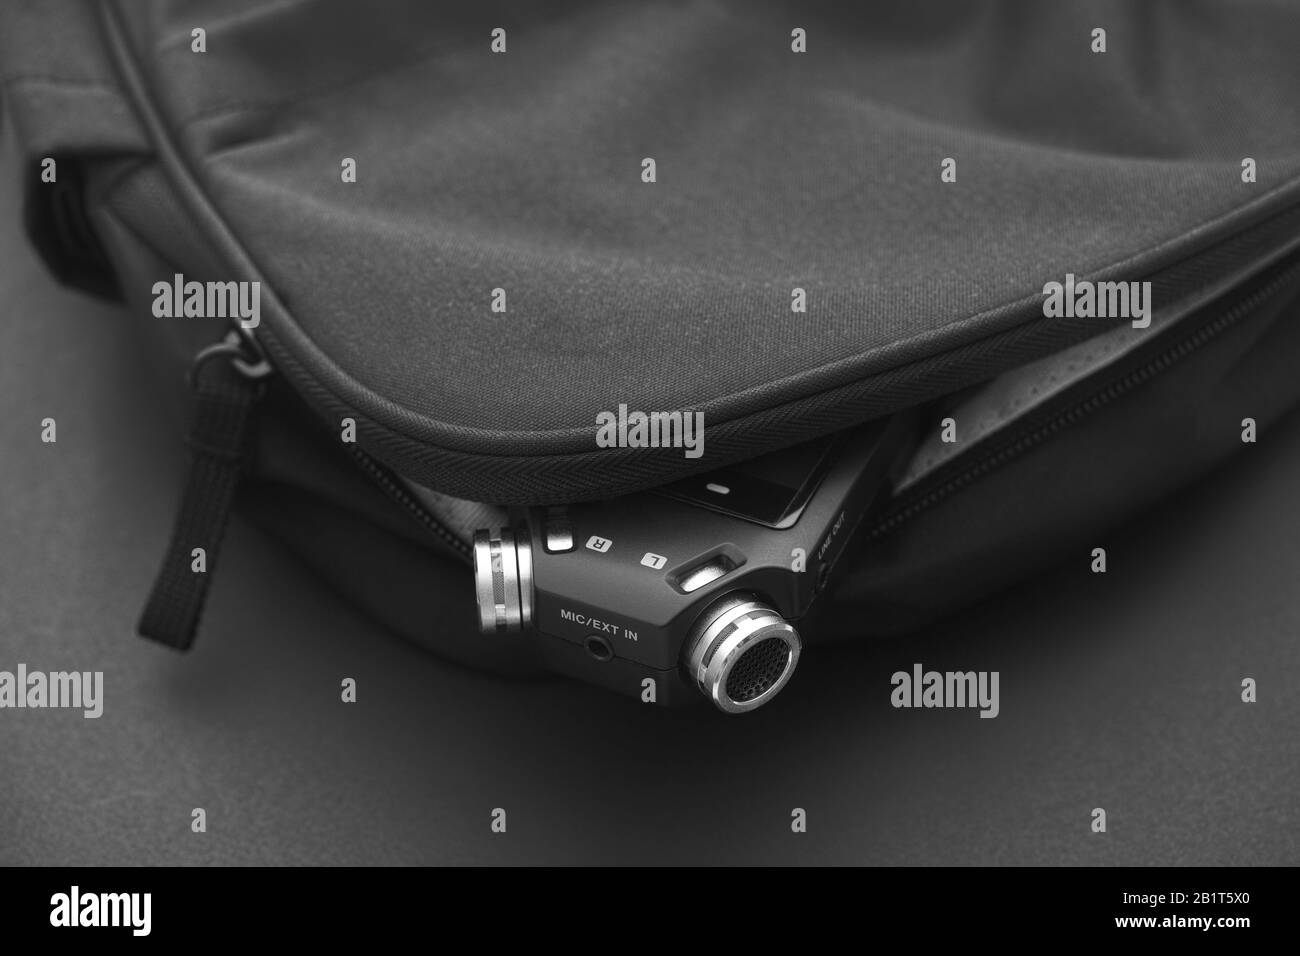 Voice recorder in a backpack. Black and White. Close up. Stock Photo